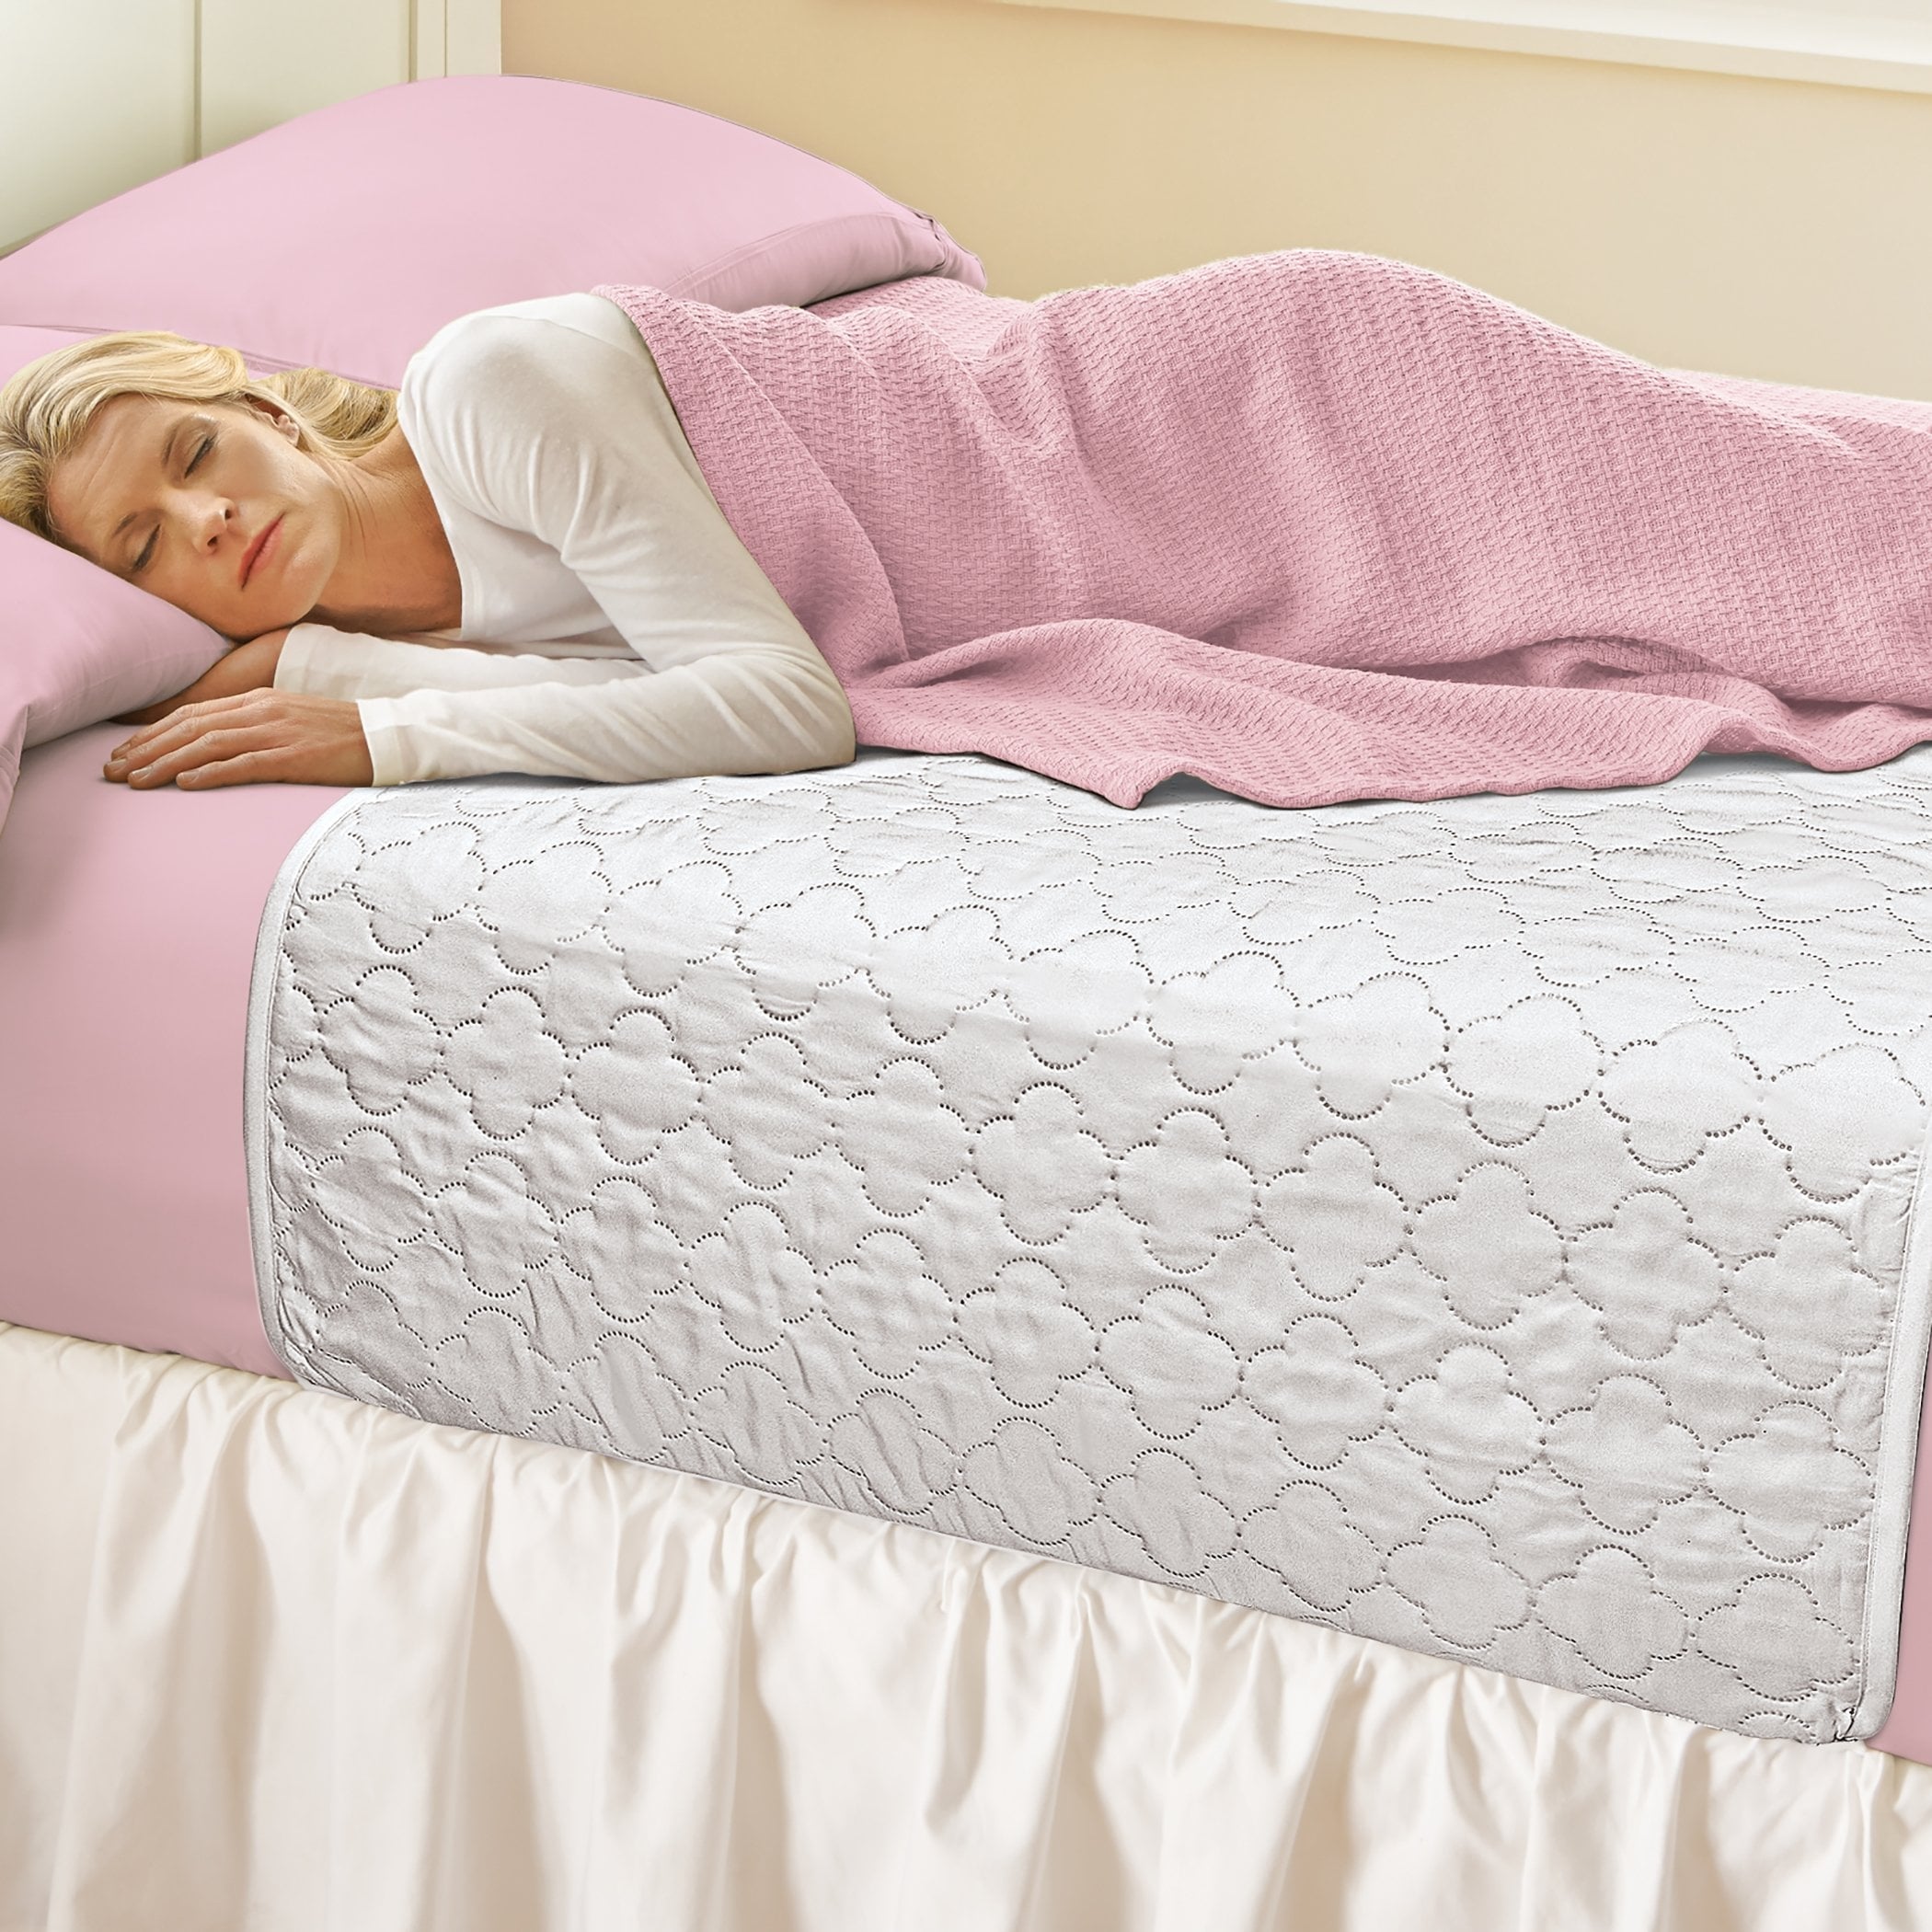 Highly Absorbent Washable Waterproof Bed Pad - On Sale - Bed Bath